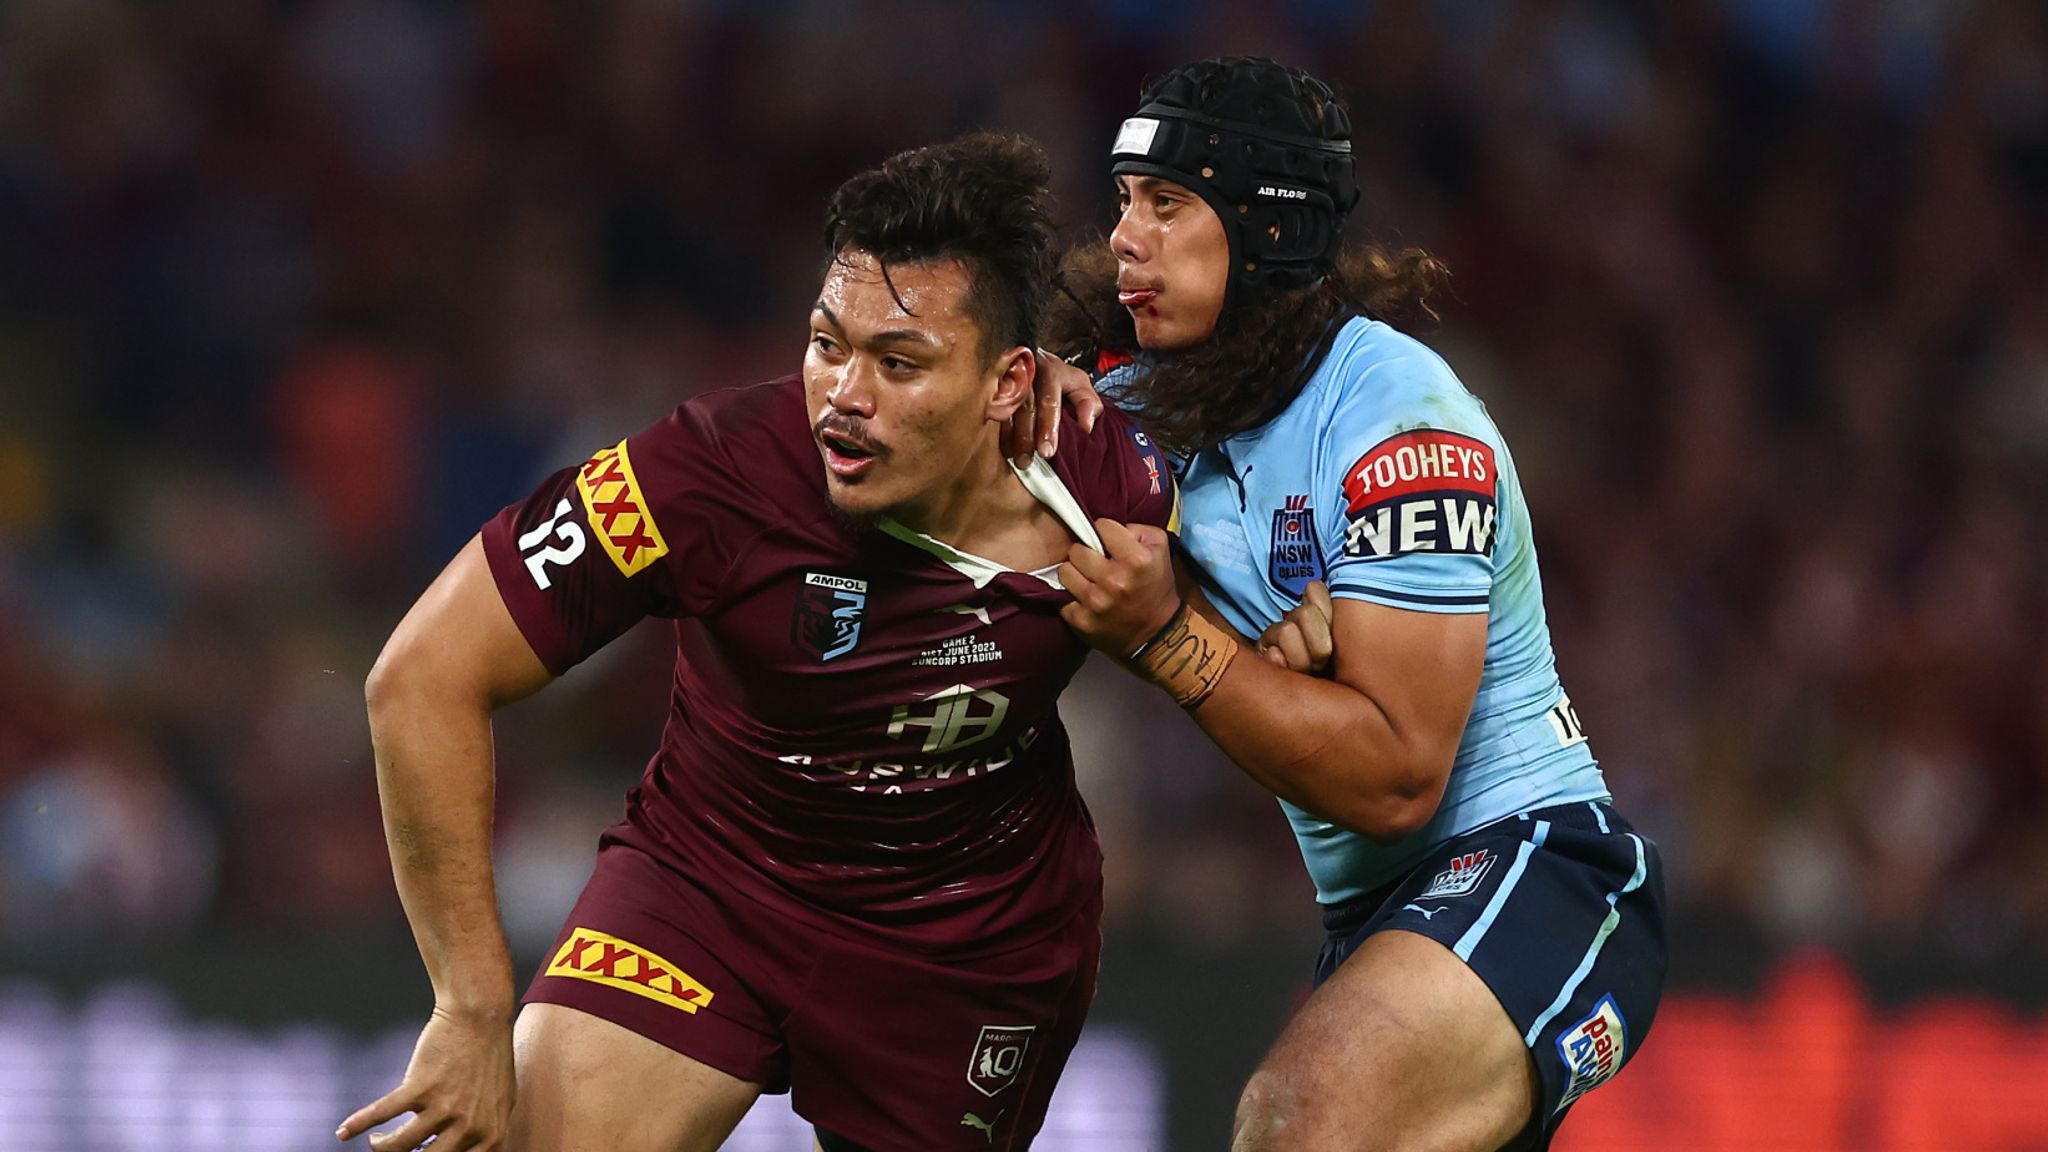 State of Origin III New South Wales beat Queensland 24-10 at home in Sydney